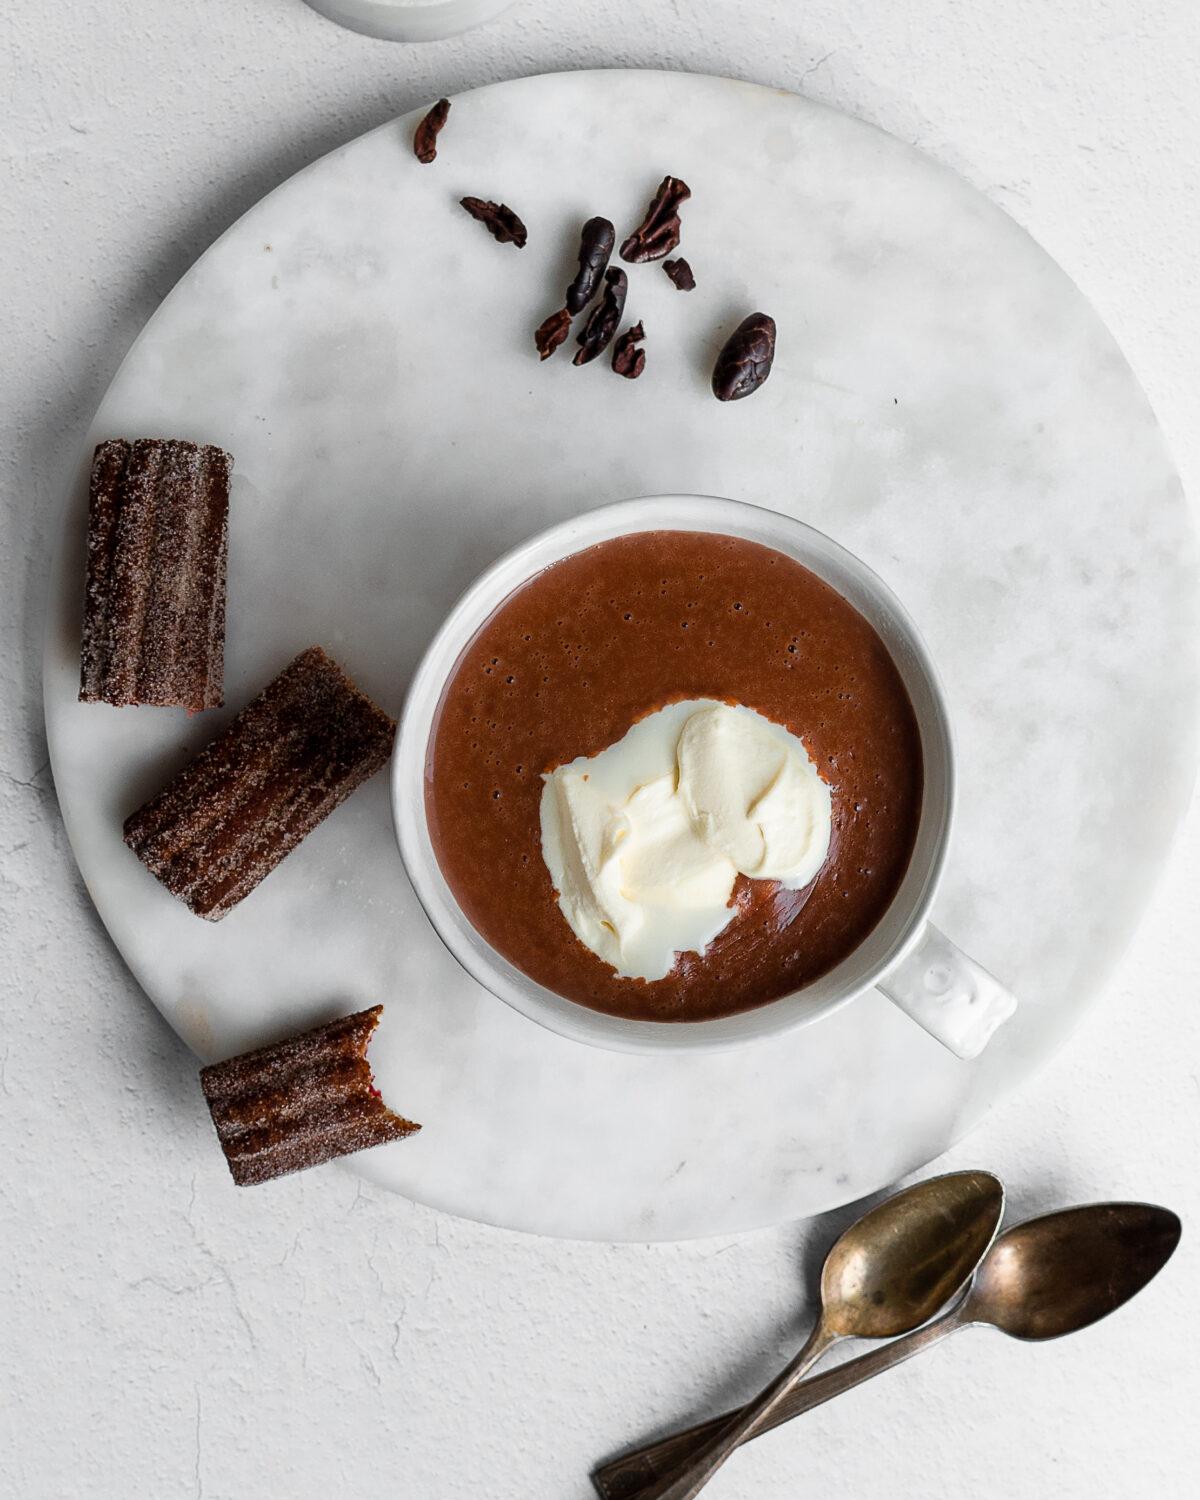 Spanish-style drinking chocolate is rich and velvety, and best served in smaller portions. (Jennifer McGruther)